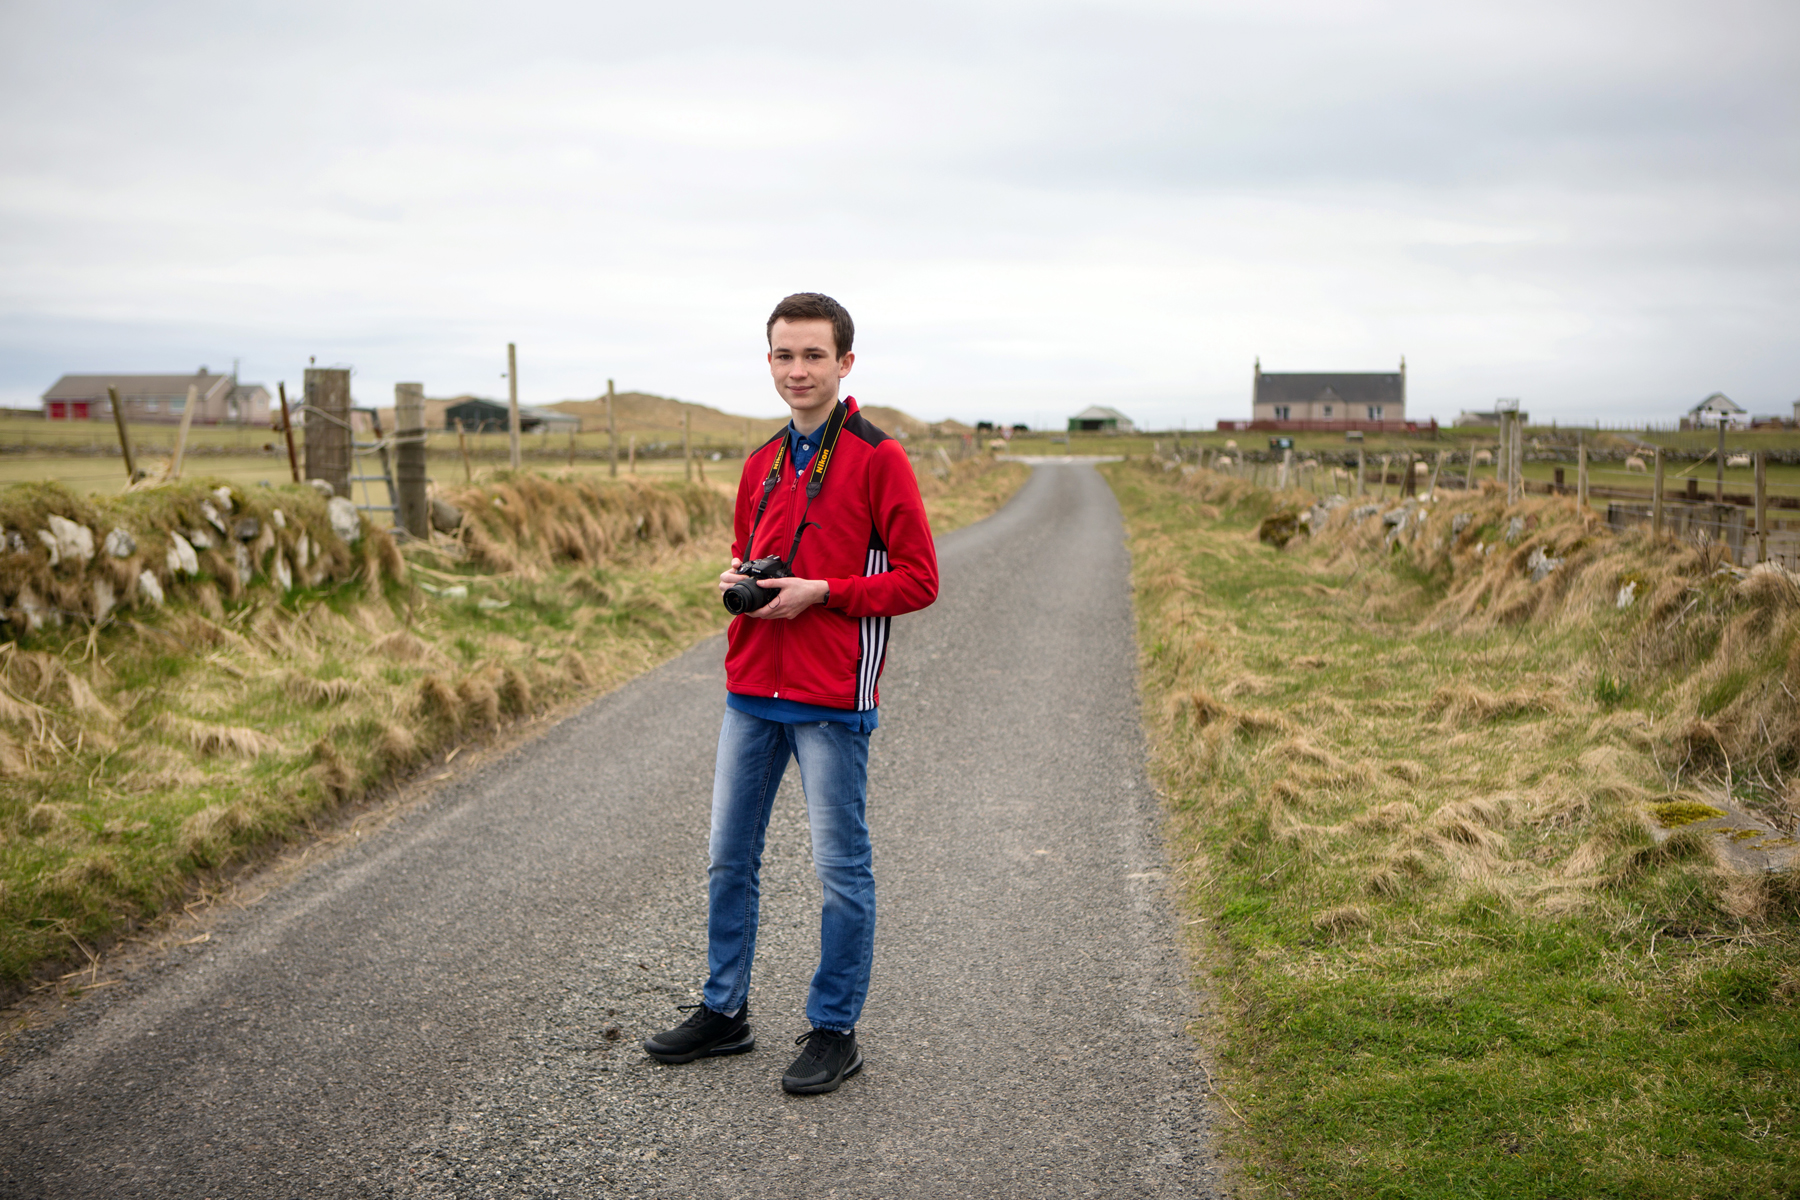 A teenage boy in a red jacket and blue jeans stands on a single track road, with grass either side